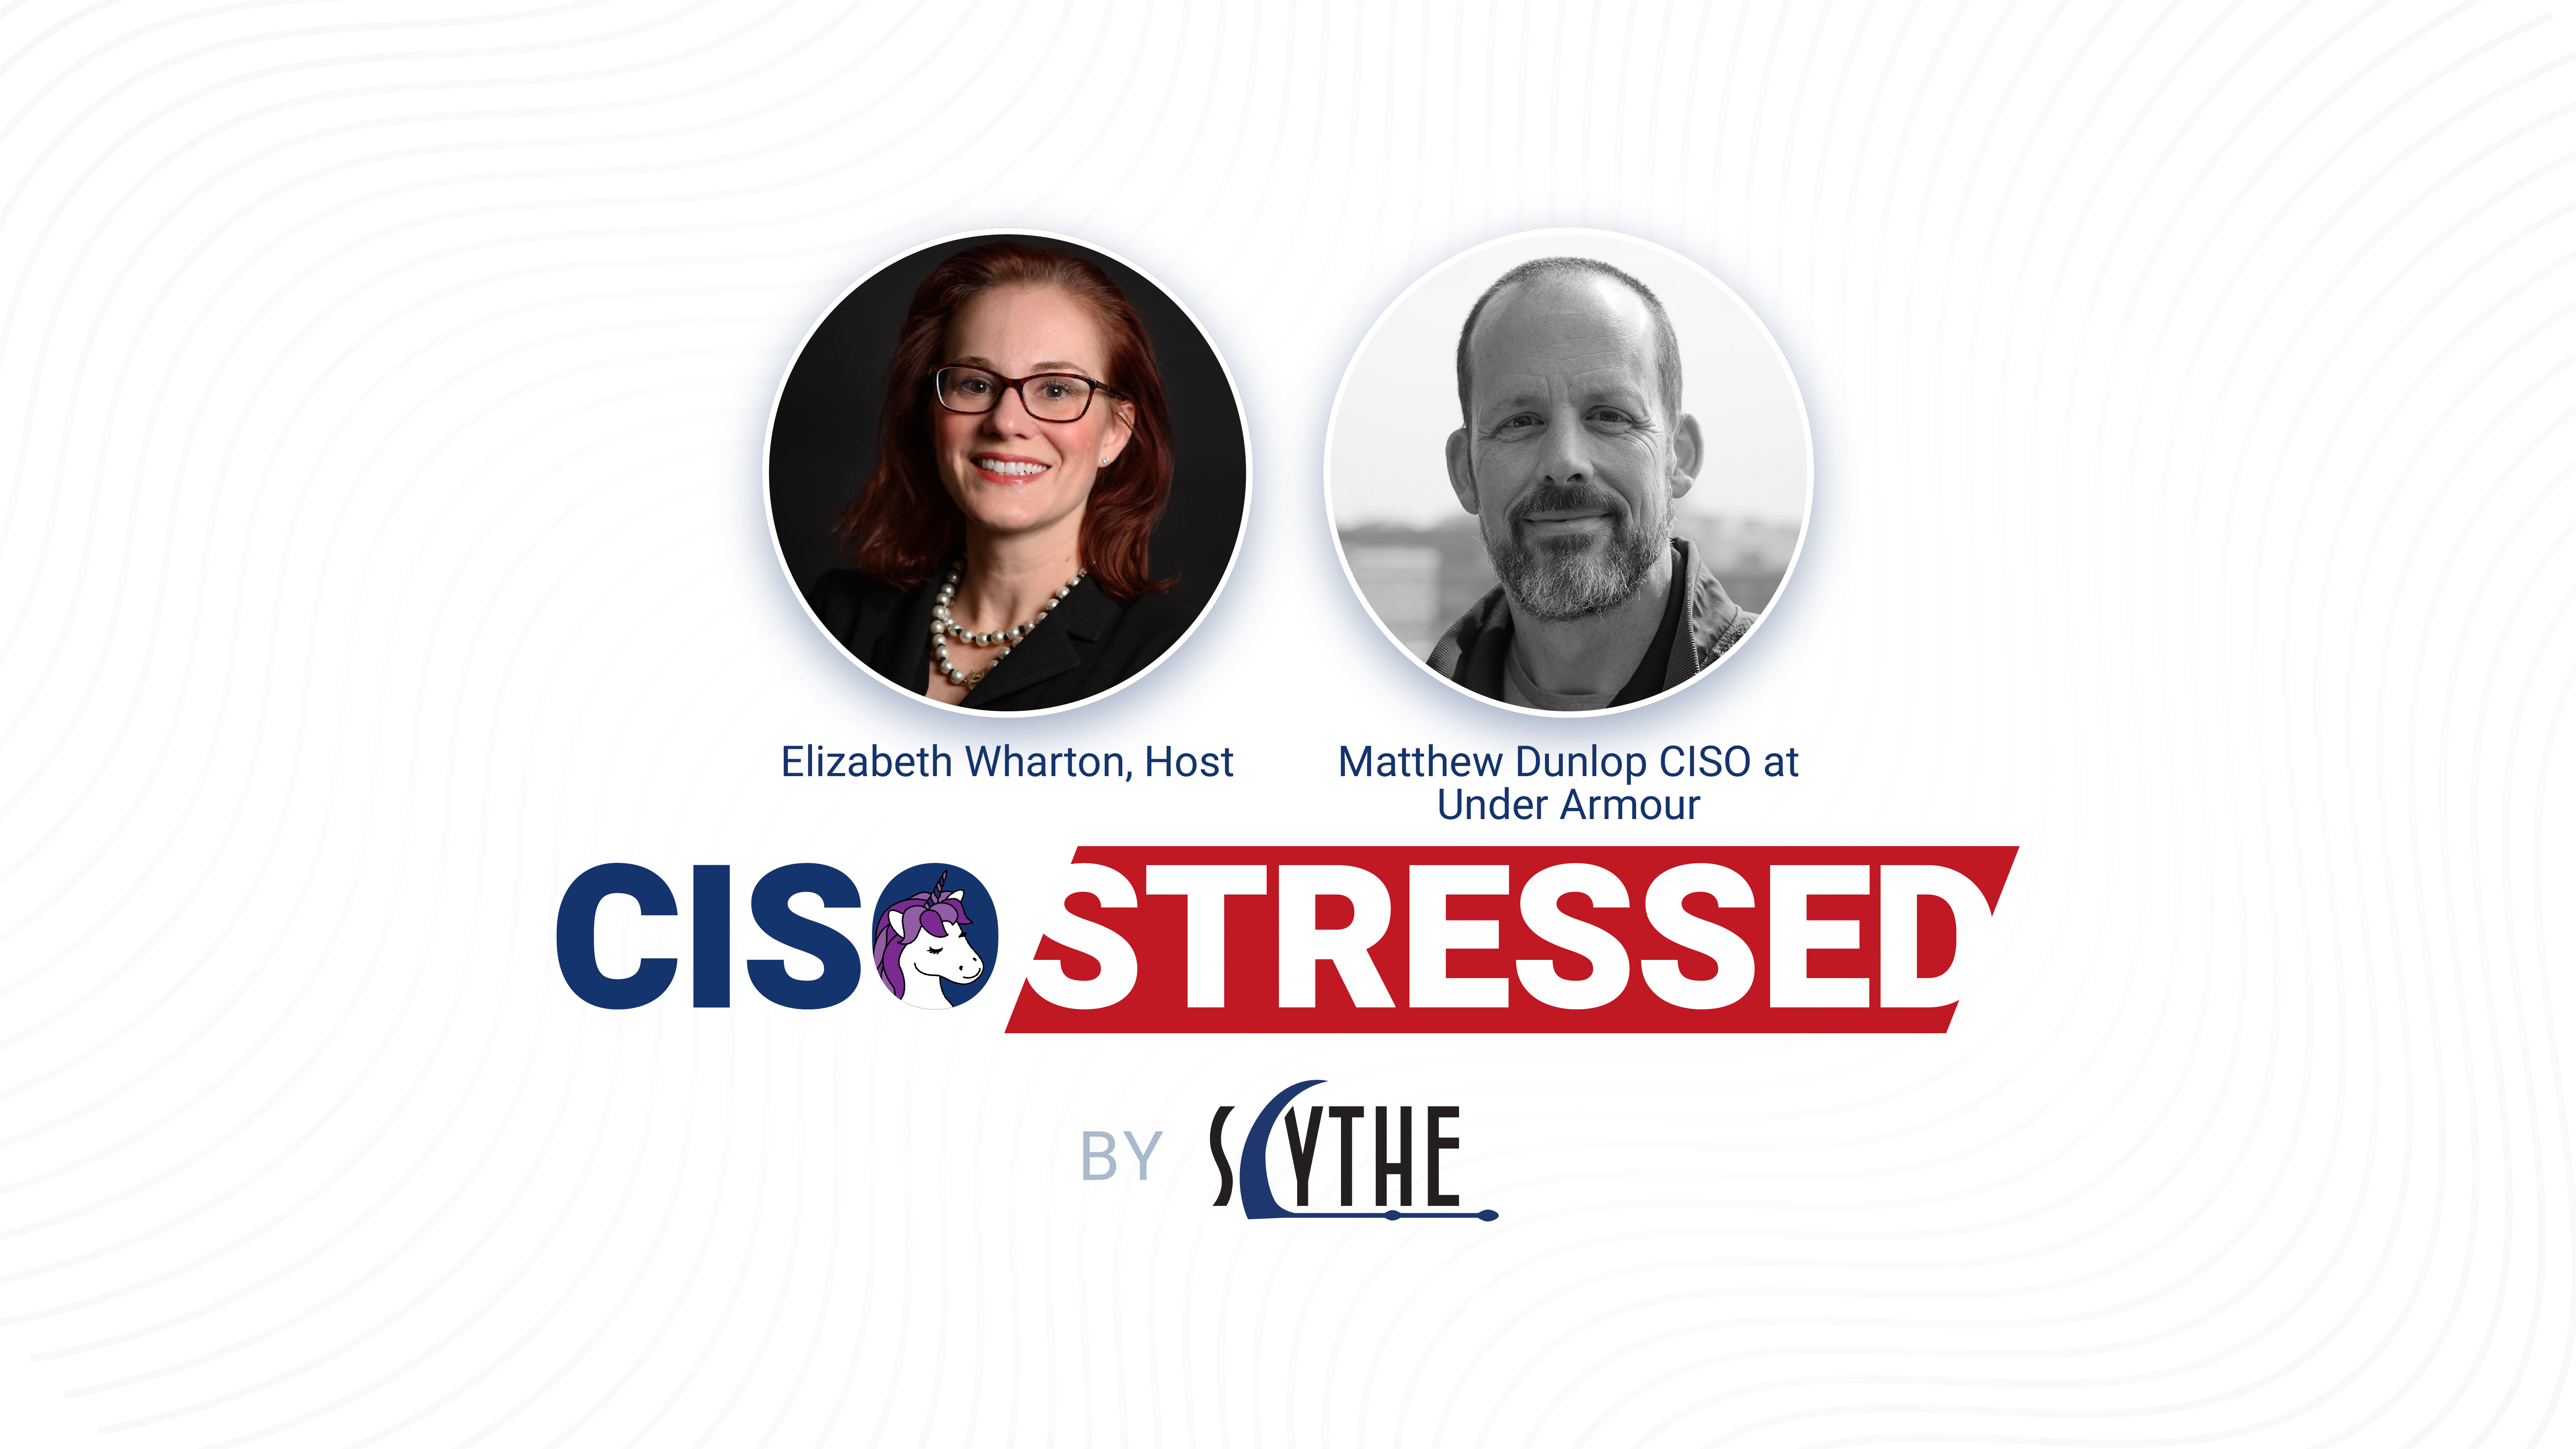 CISO Stressed Episode 7: Matthew Dunlop CISO at Under Armour